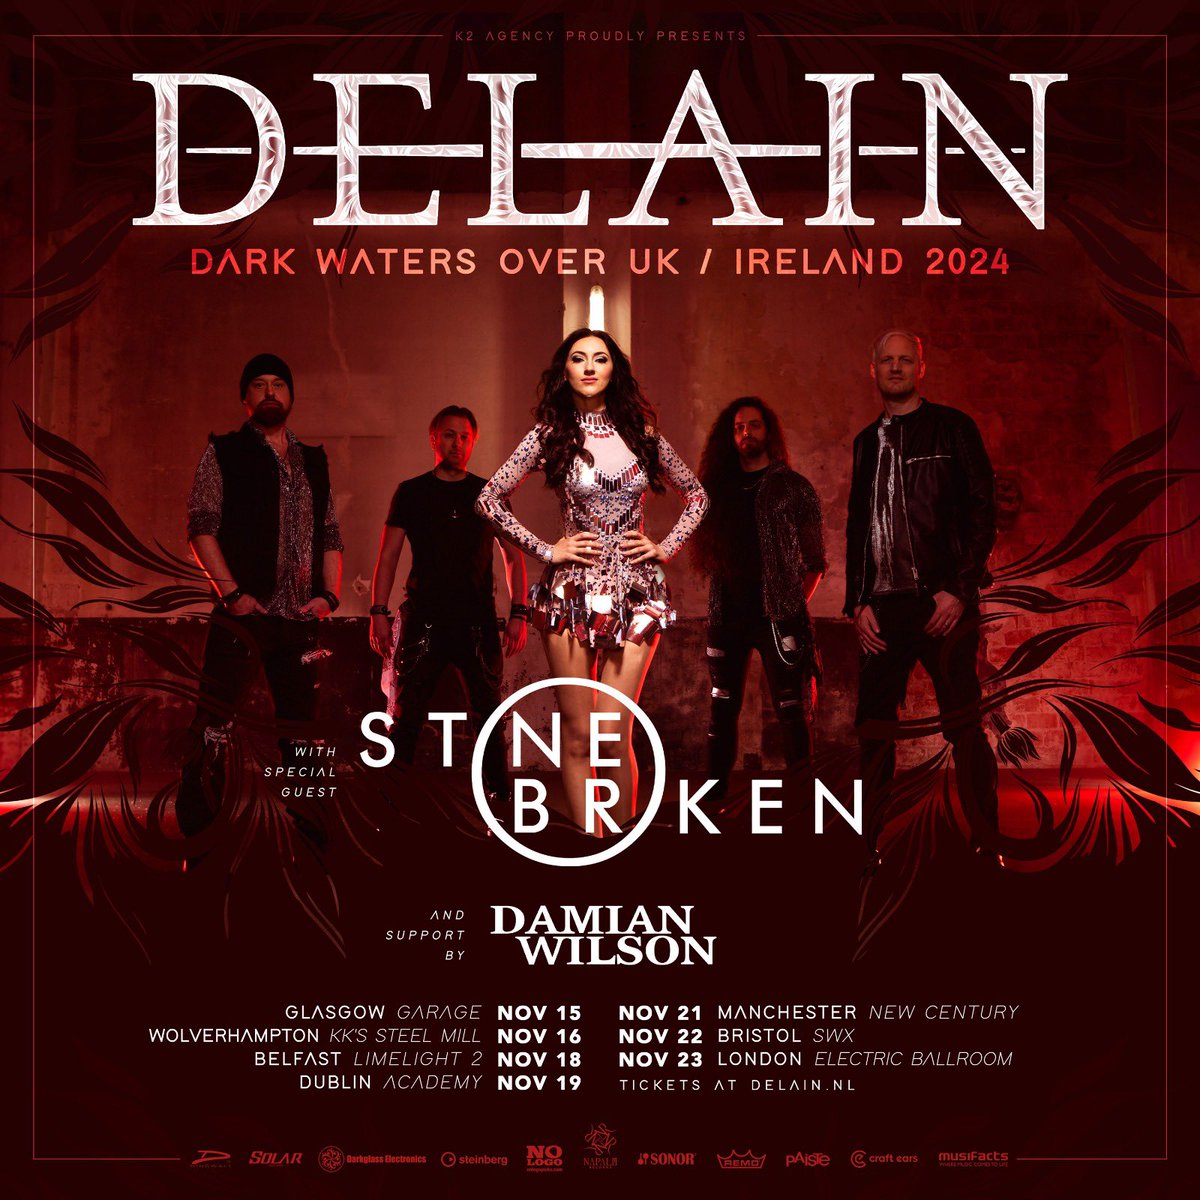 We are delighted to announce that we are heading on the road as special guests to Delain this November around the UK & Ireland! 🔥 See you there! 🤘 Ticket link here - delain.nl/shows #stonebroken #thebrokenarmy